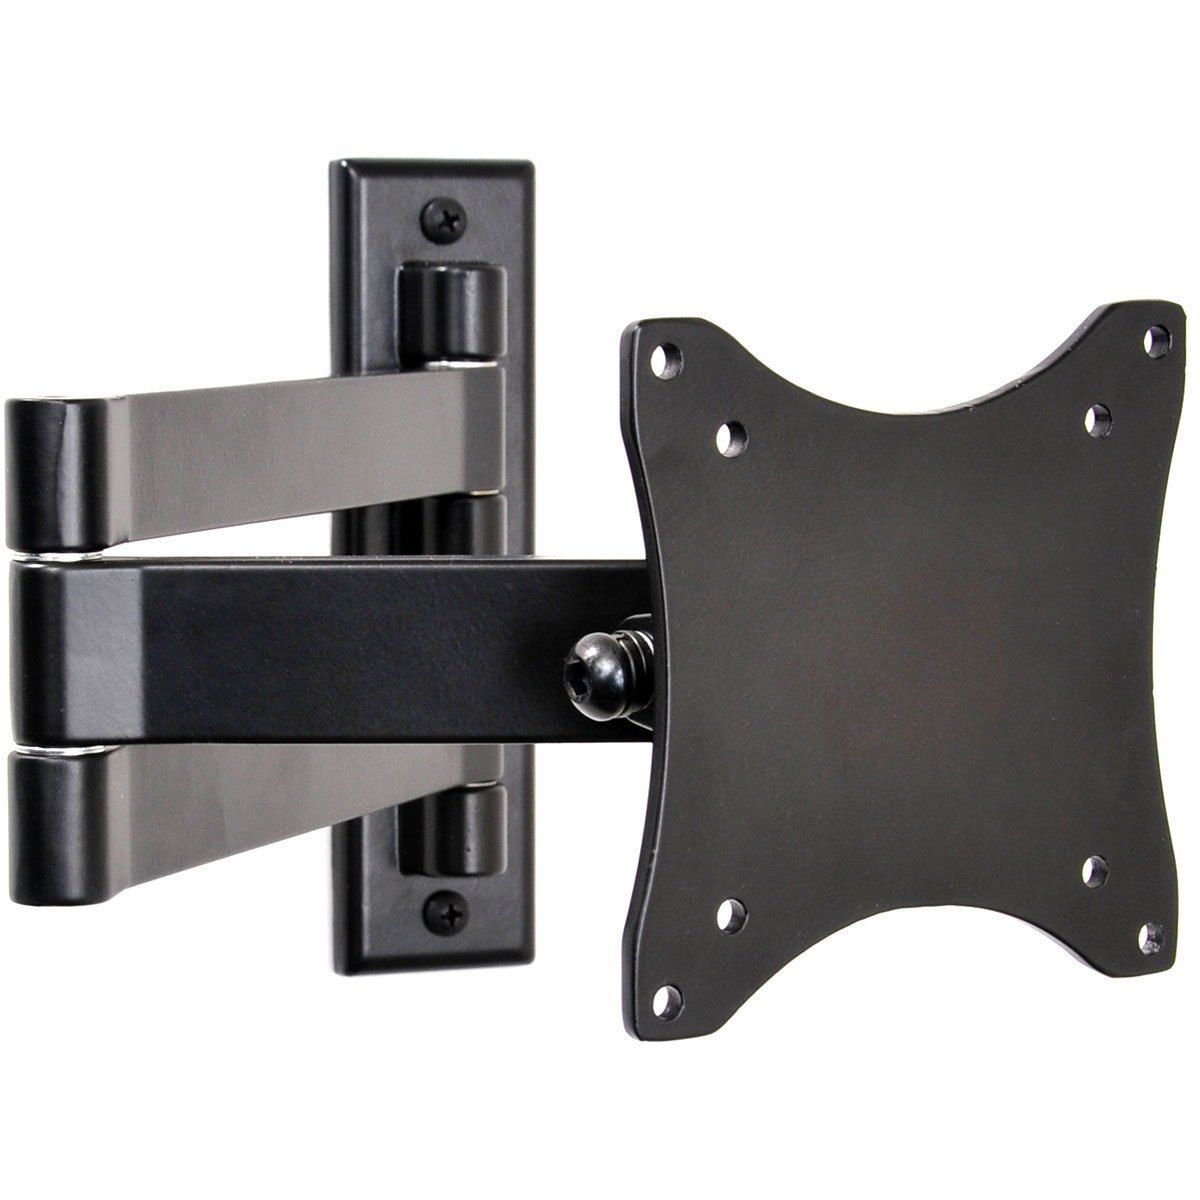 Digiair: Videosecu Tilt Swivel Tv Monitor Wall Mount For Aoc 16 29 With Regard To Fashionable Tilted Wall Mount For Tv (View 19 of 20)